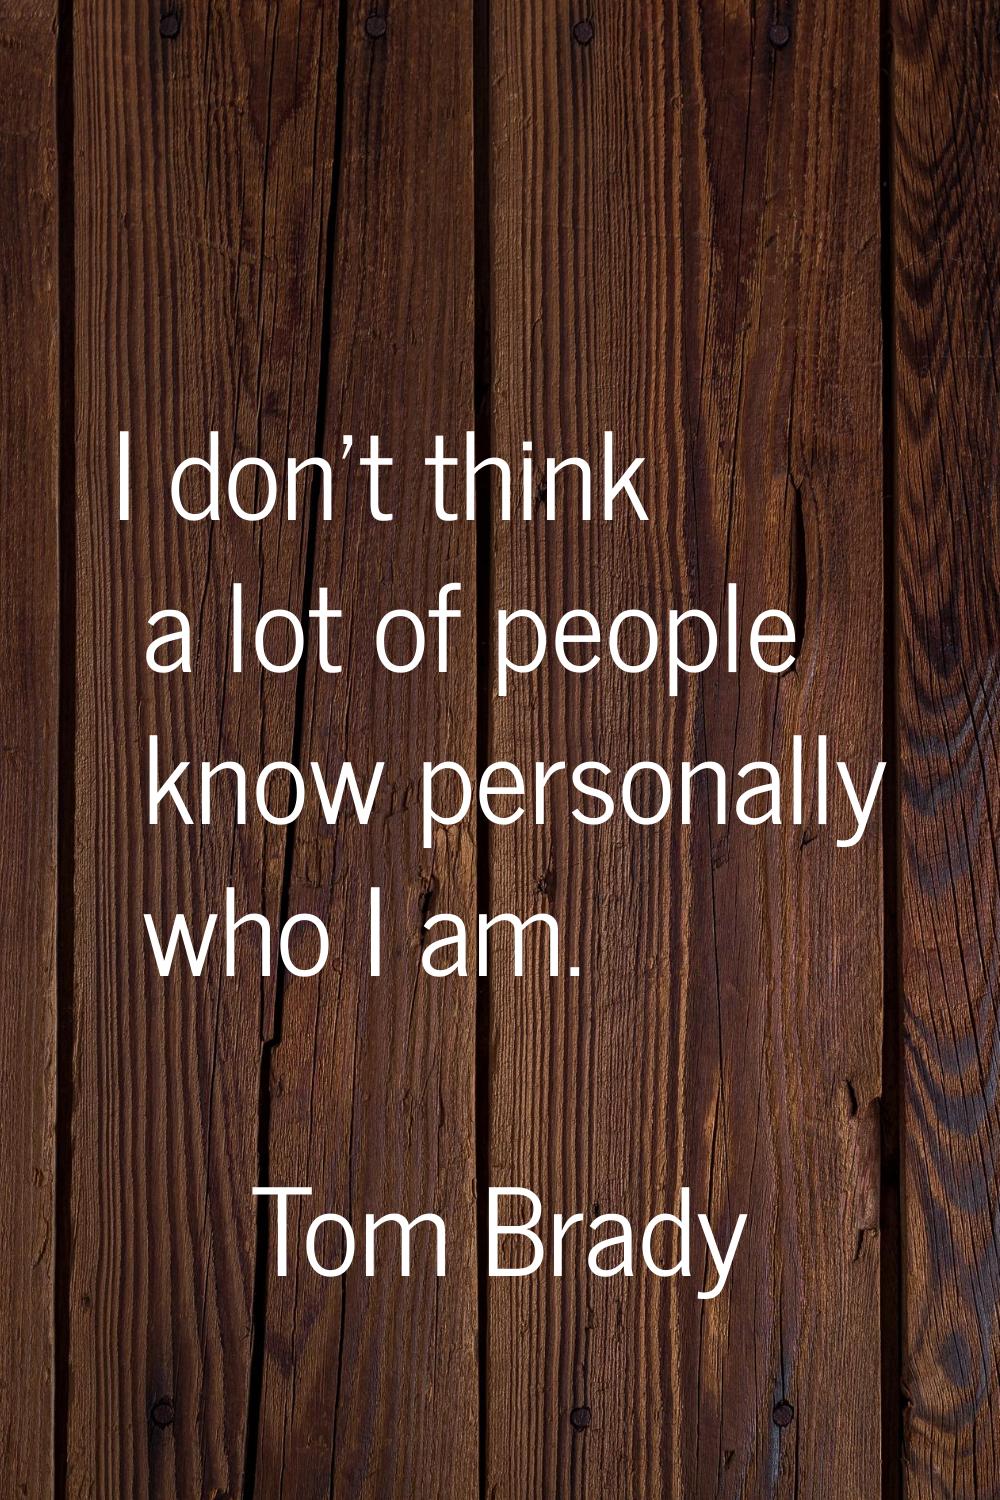 I don't think a lot of people know personally who I am.